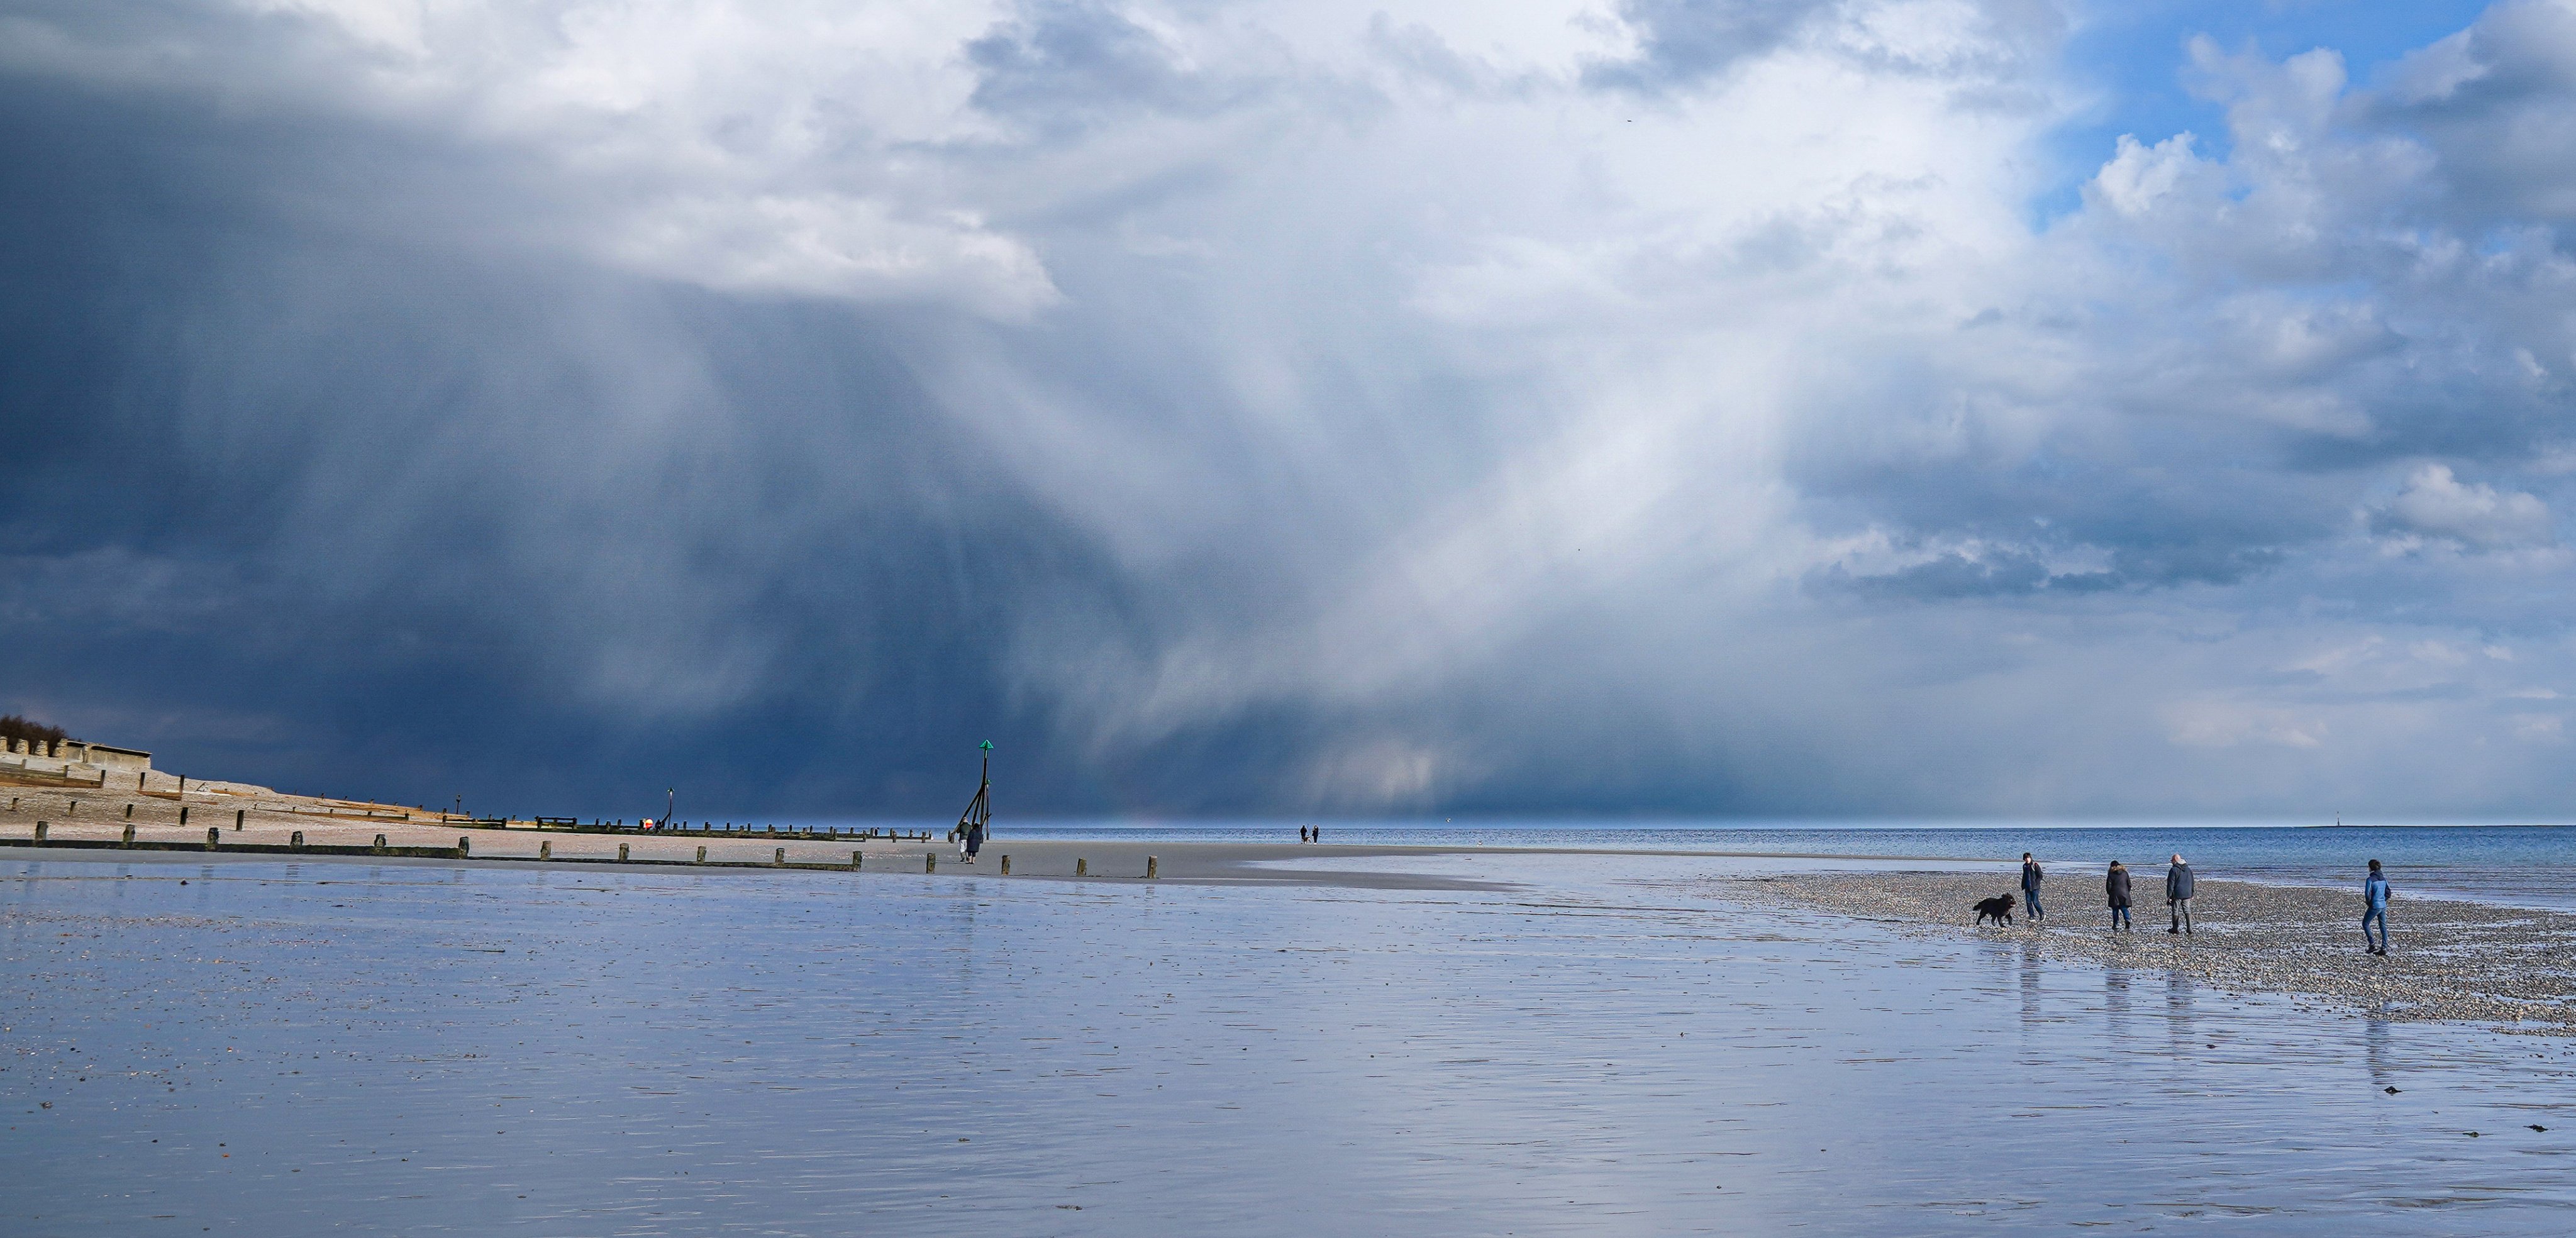 2nd Place Storm clouds and hail showers out to sea, off Selsey by Coastal JJ UK @CoastalJJuk